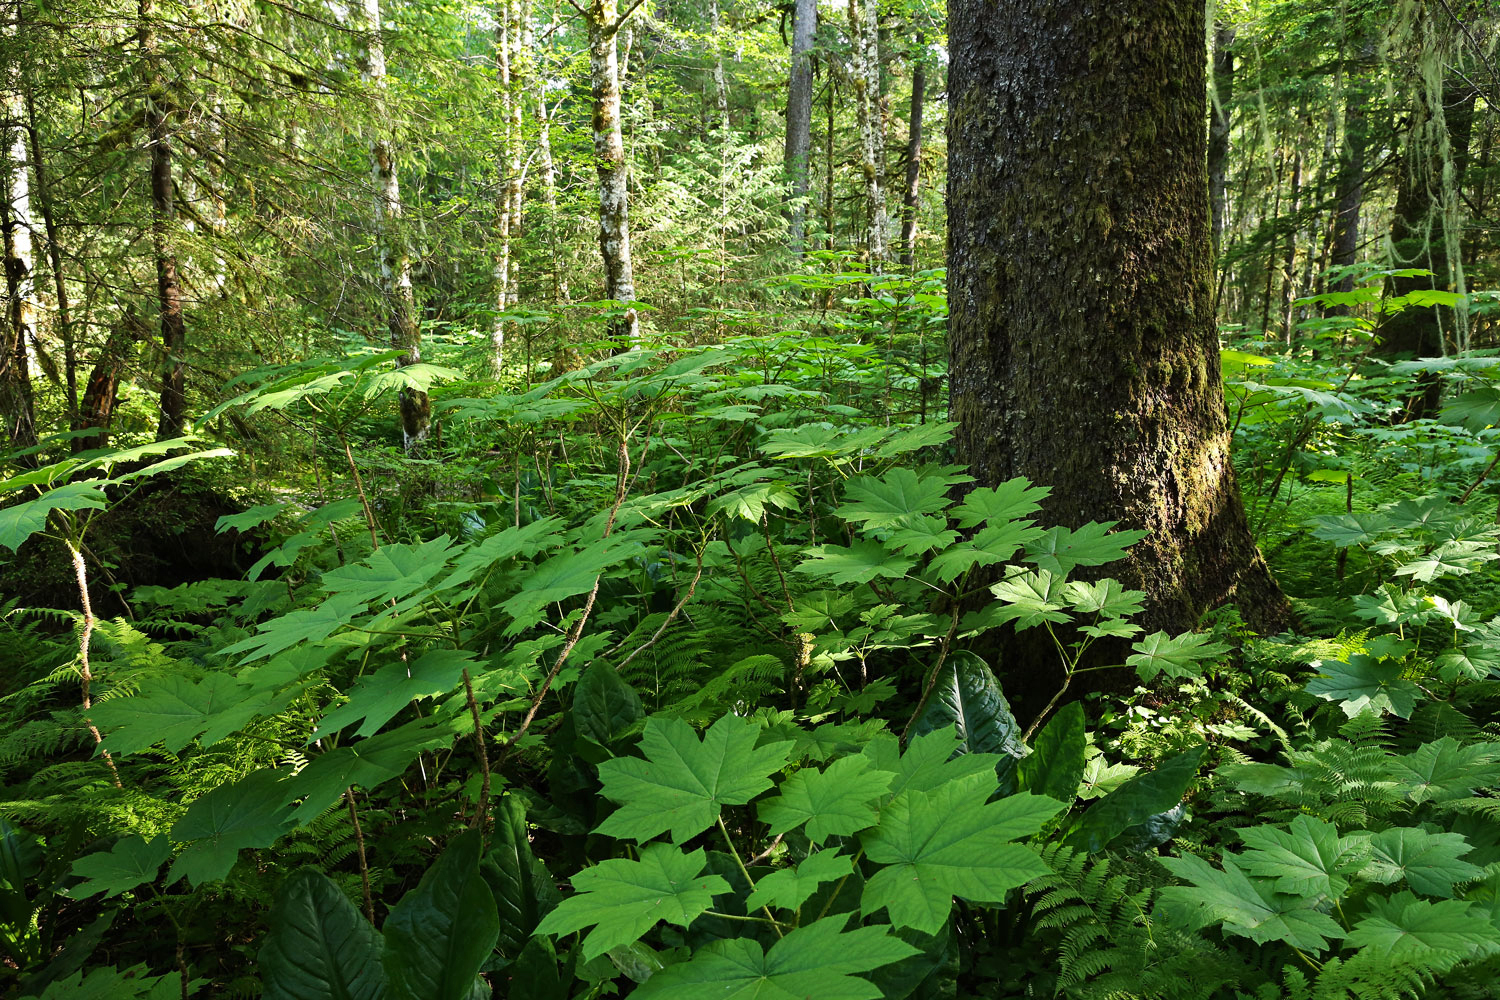 A healthy forest understory has a wide variety of plants.